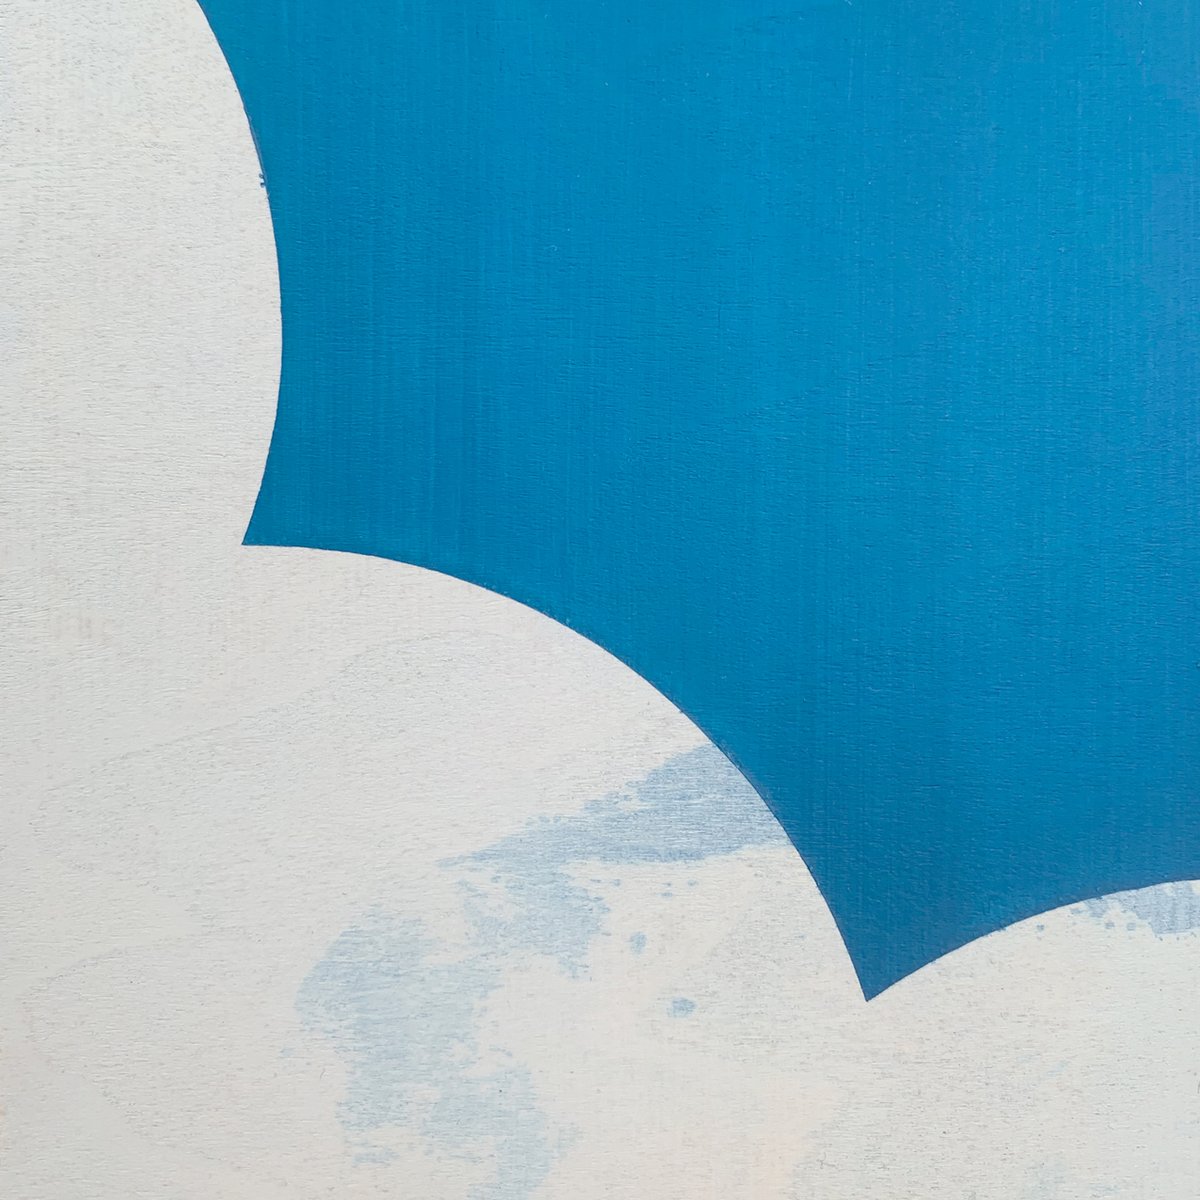 Denis Kelly, Untitled (Grey Blue) (detail), 2017, acrylic on found wood on birch plywood, 29 x 25 cm; courtesy of the artist | Denis Kelly: Look, then Look Again | Monday 14 June – Sunday 11 July 2021 | Royal Hibernian Academy